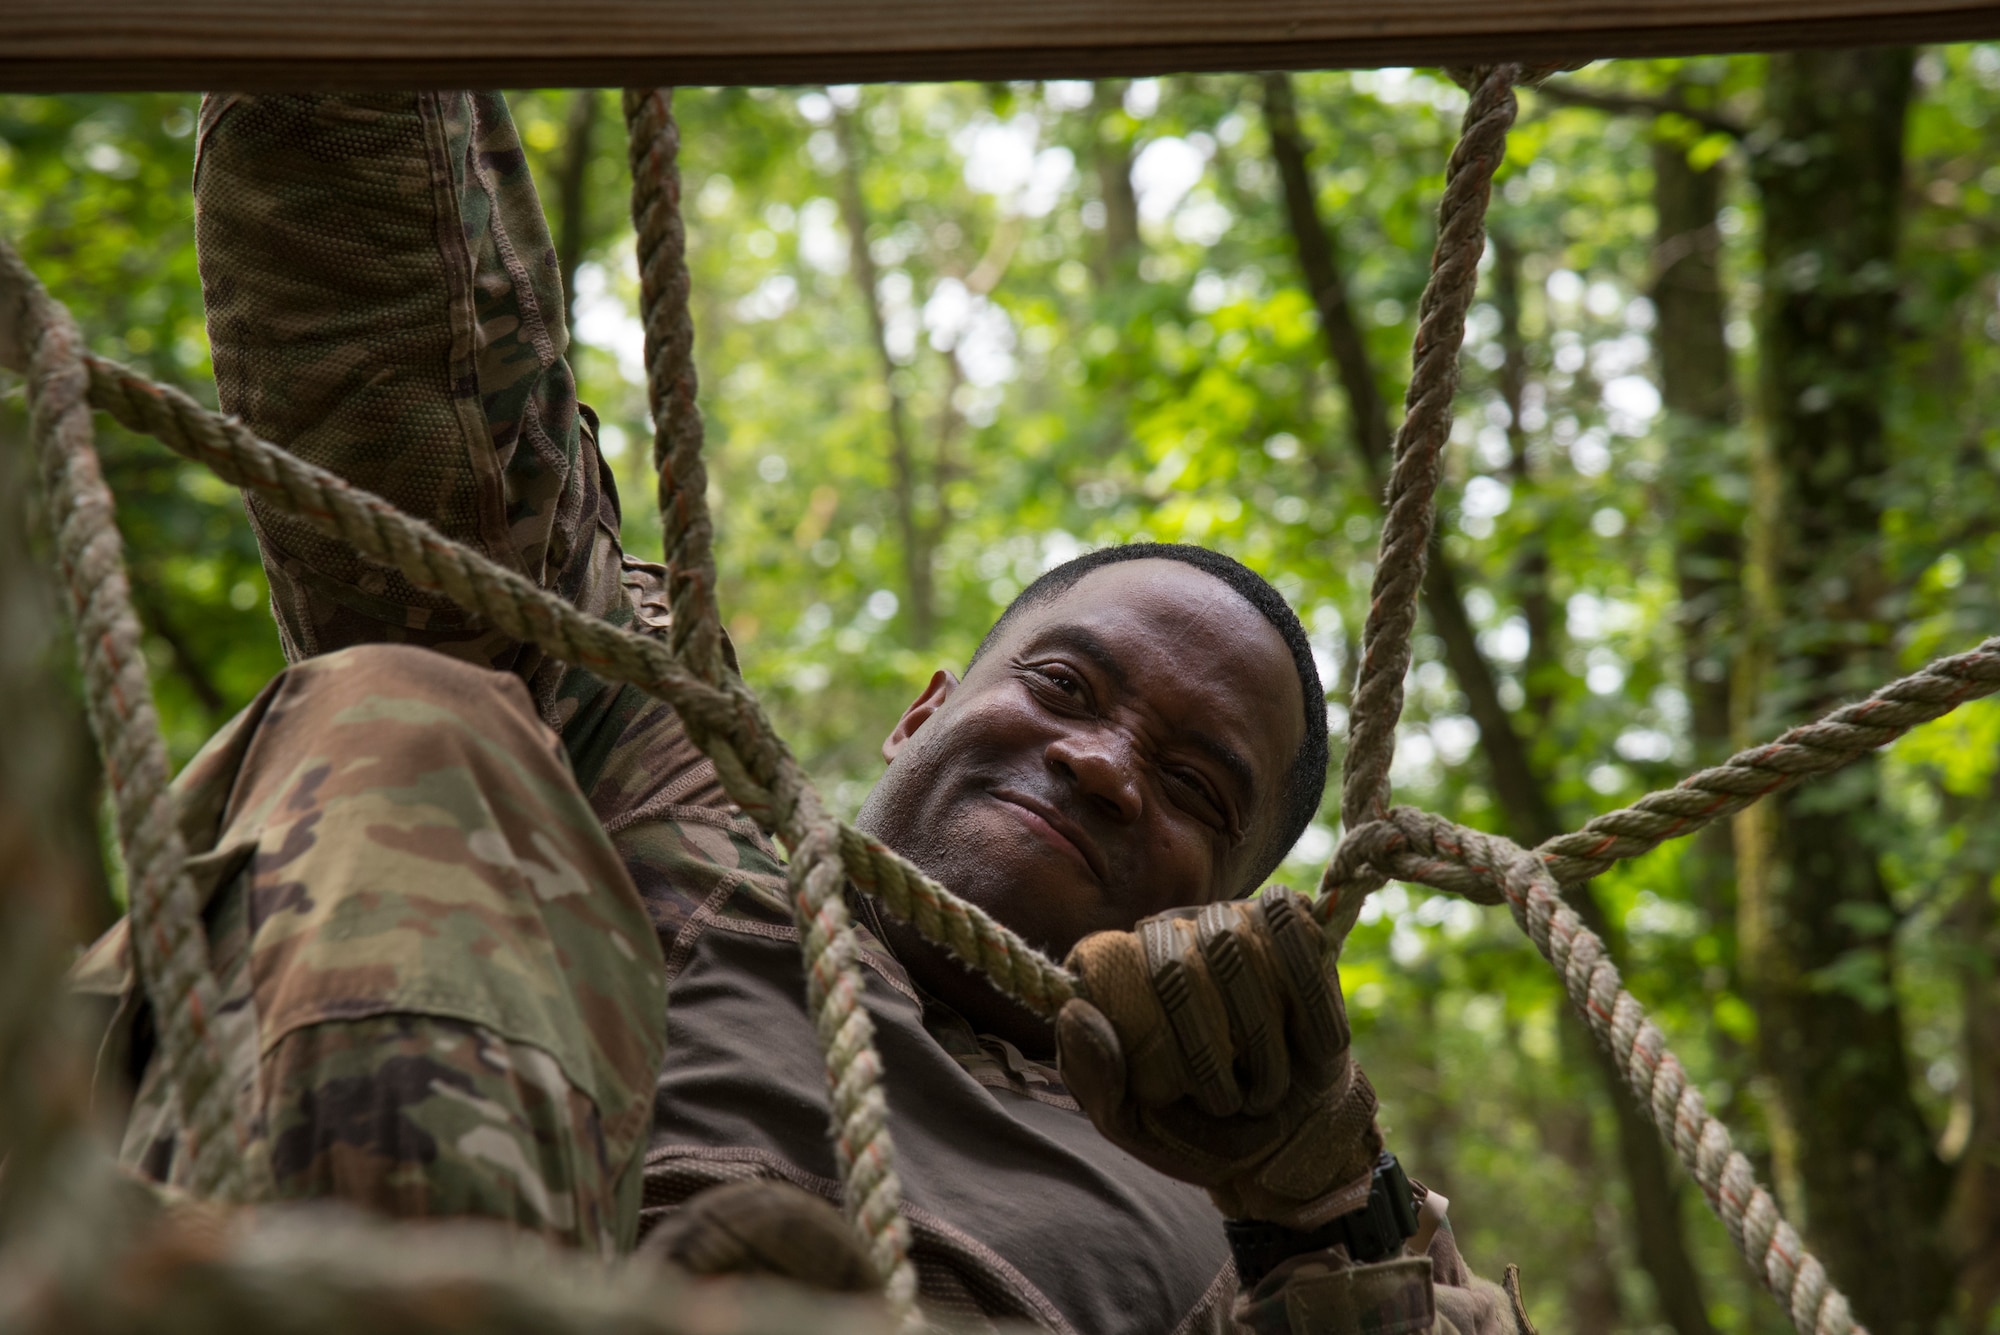 Tech. Sgt. completes an obstacle course